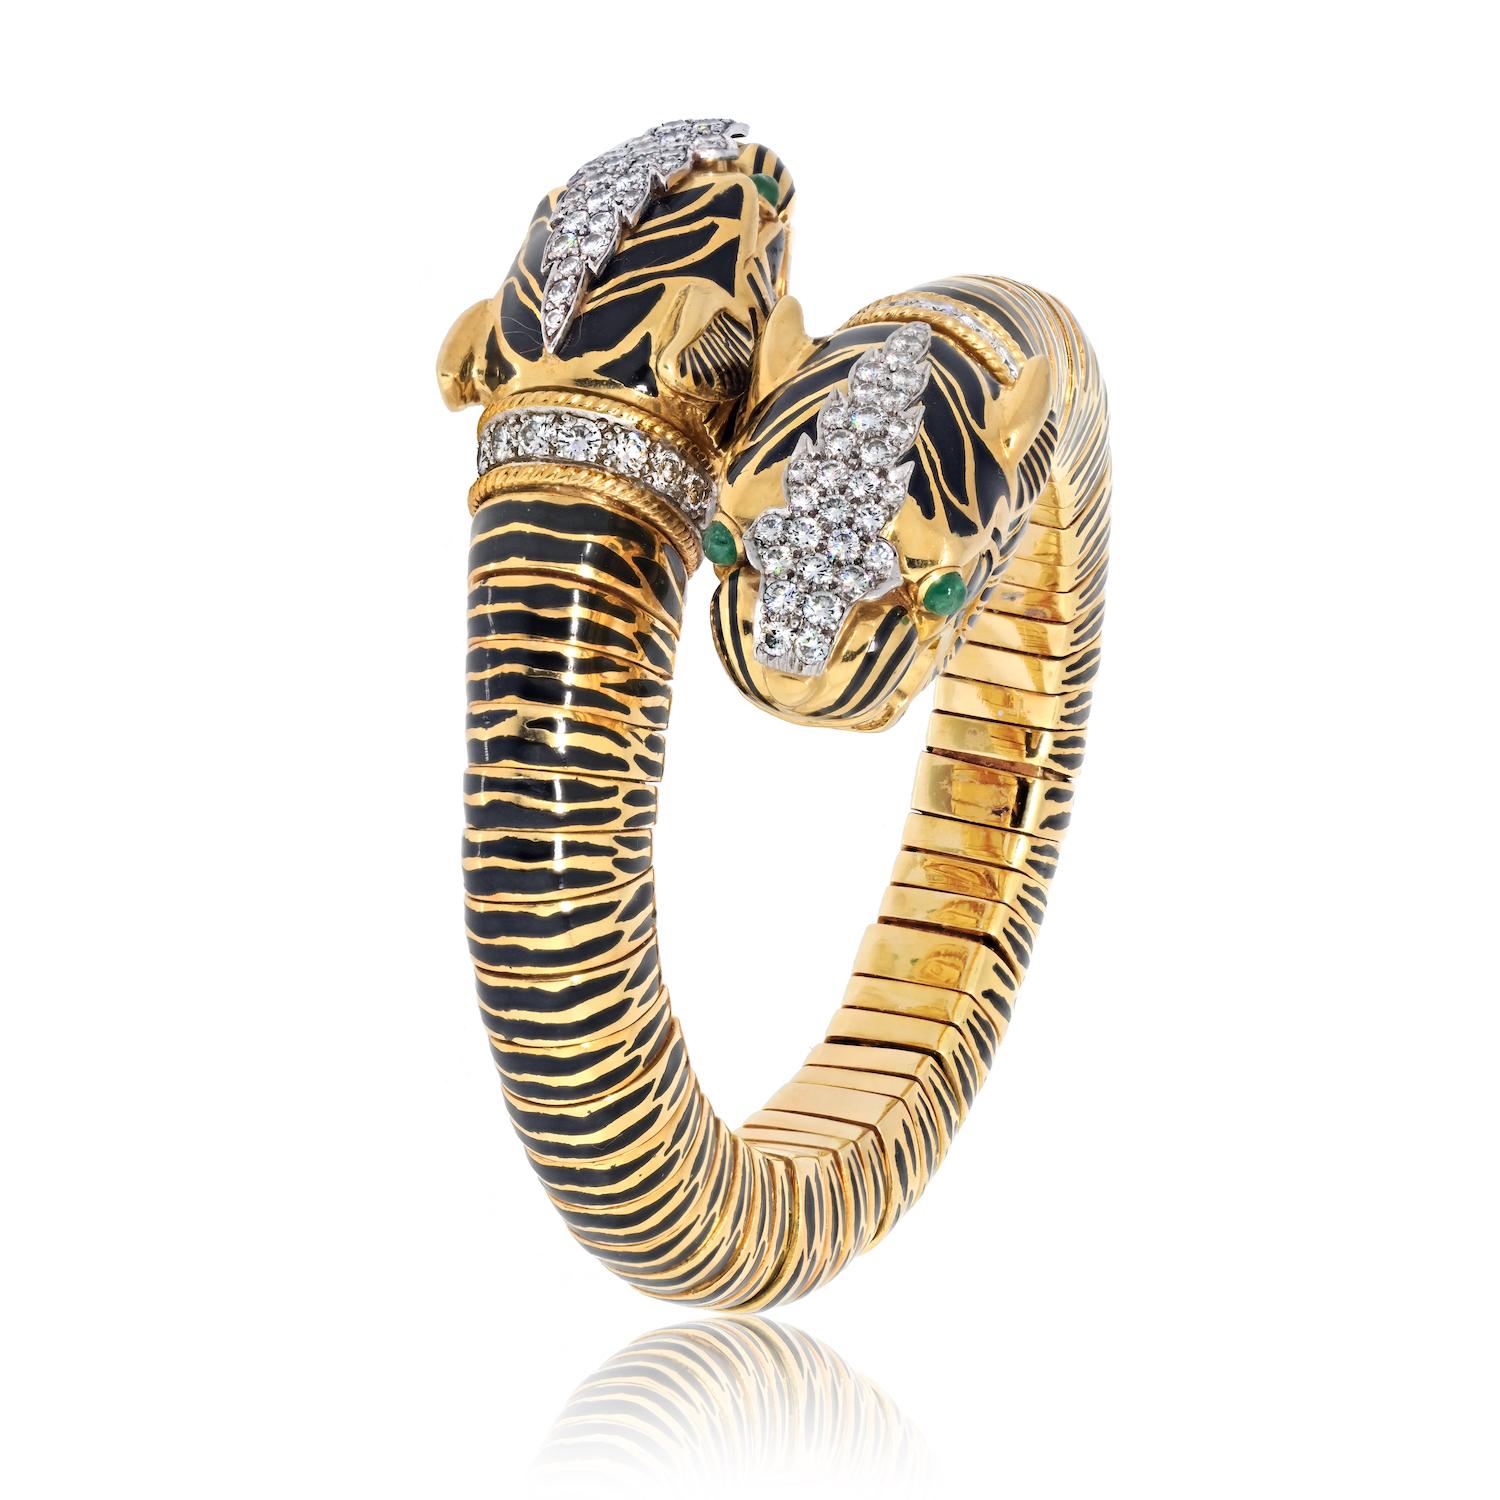 Embrace the wild elegance of the David Webb Kingdom Collection with this remarkable double-tiger head bracelet. Crafted in lustrous 18k yellow gold, the bangle features striking black enamel stripes that add depth and character to the design. The